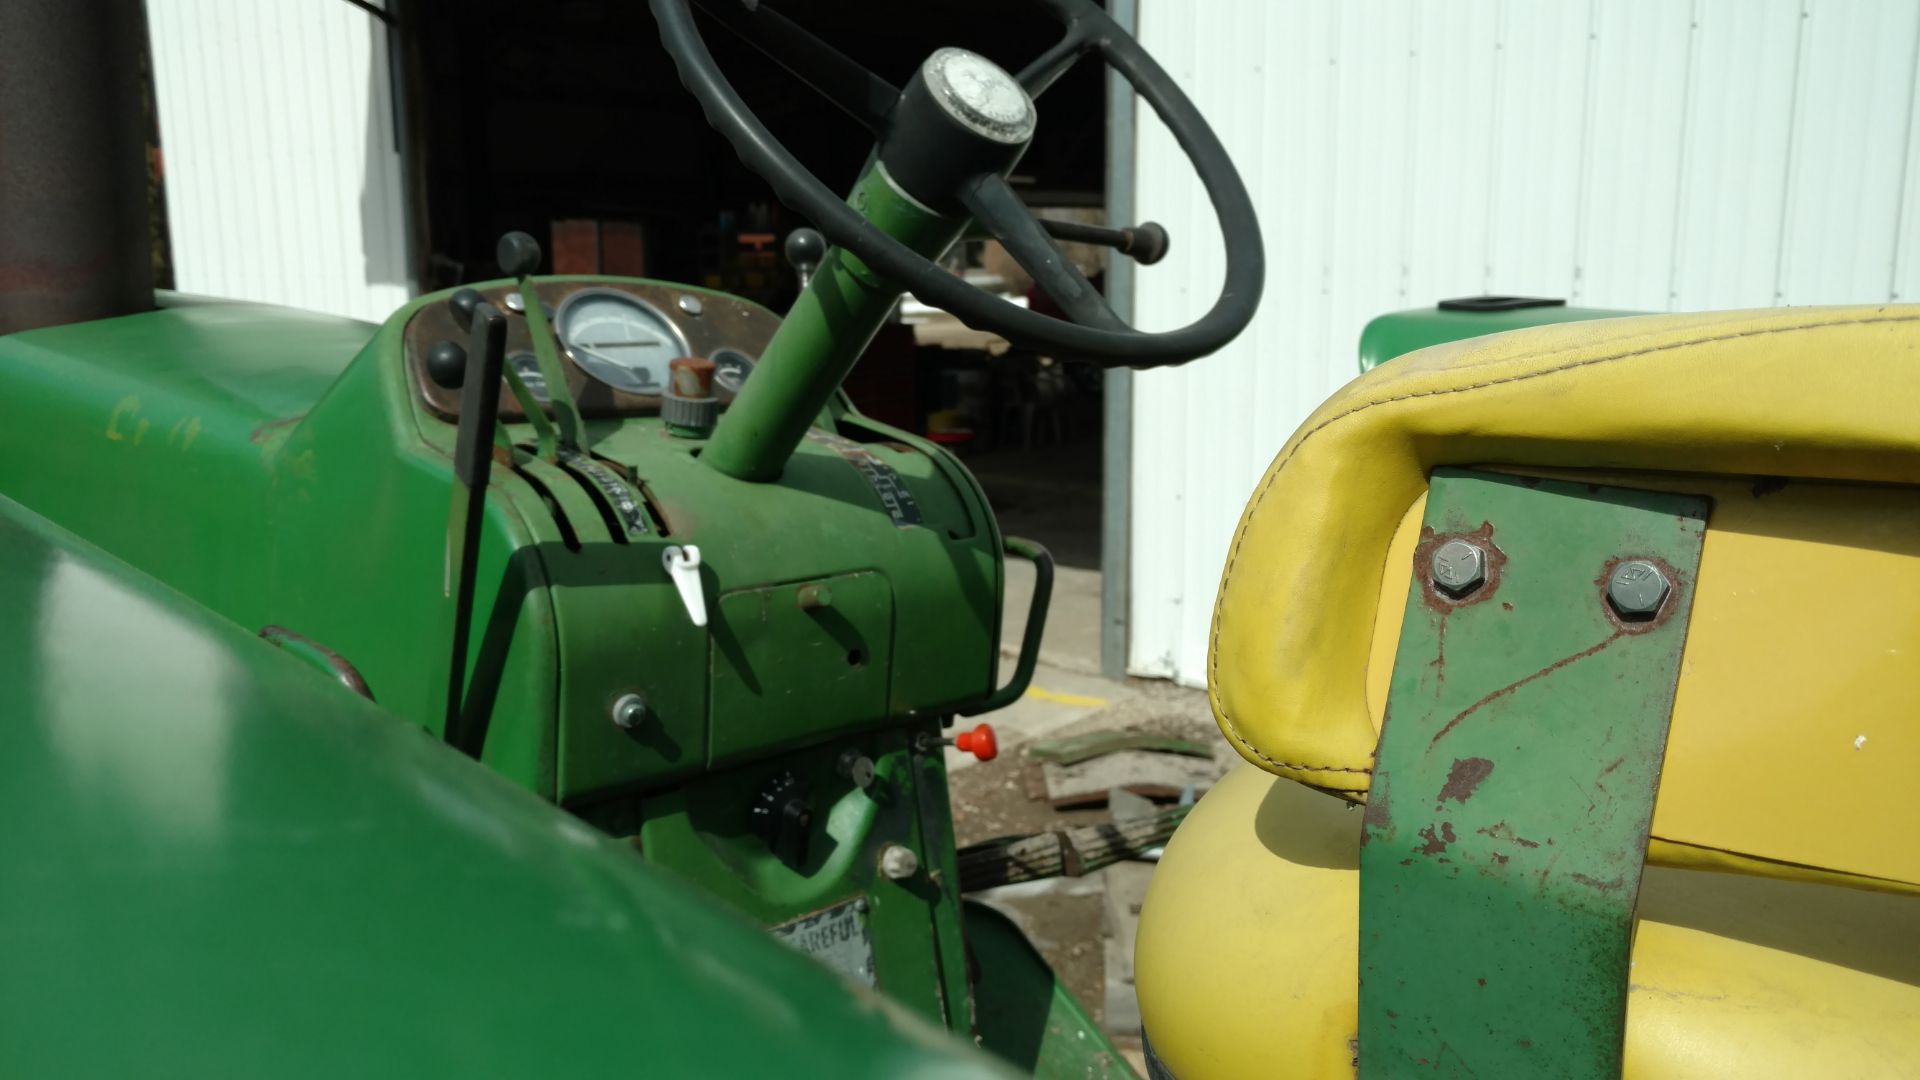 1963 JD 4010 diesel, dual hyd. outlets, 16.9/34 tires, wide front, 6300 hrs, serial # 40102T-50501; - Image 3 of 4